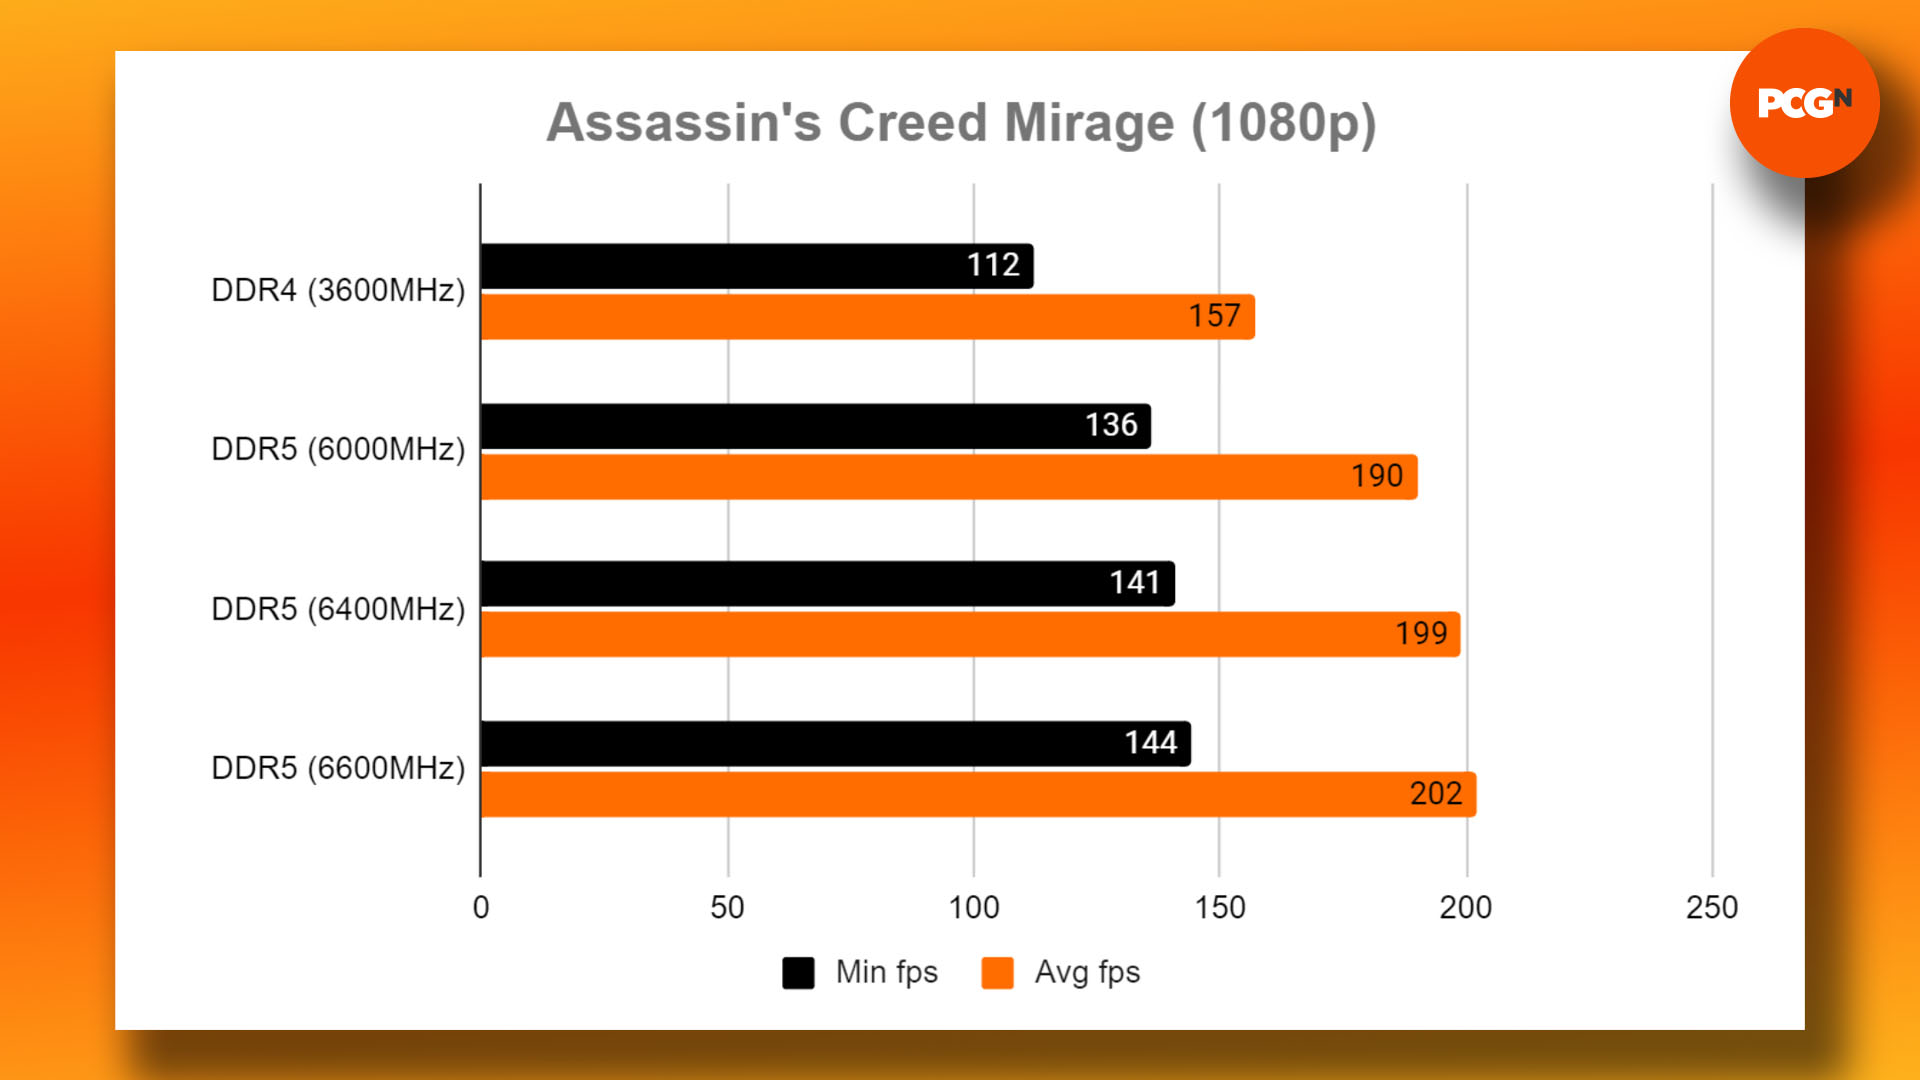 DDR4 vs DDR5 - which RAM to buy for gaming: Assassin's Creed Mirage 1080p benchmark results graph